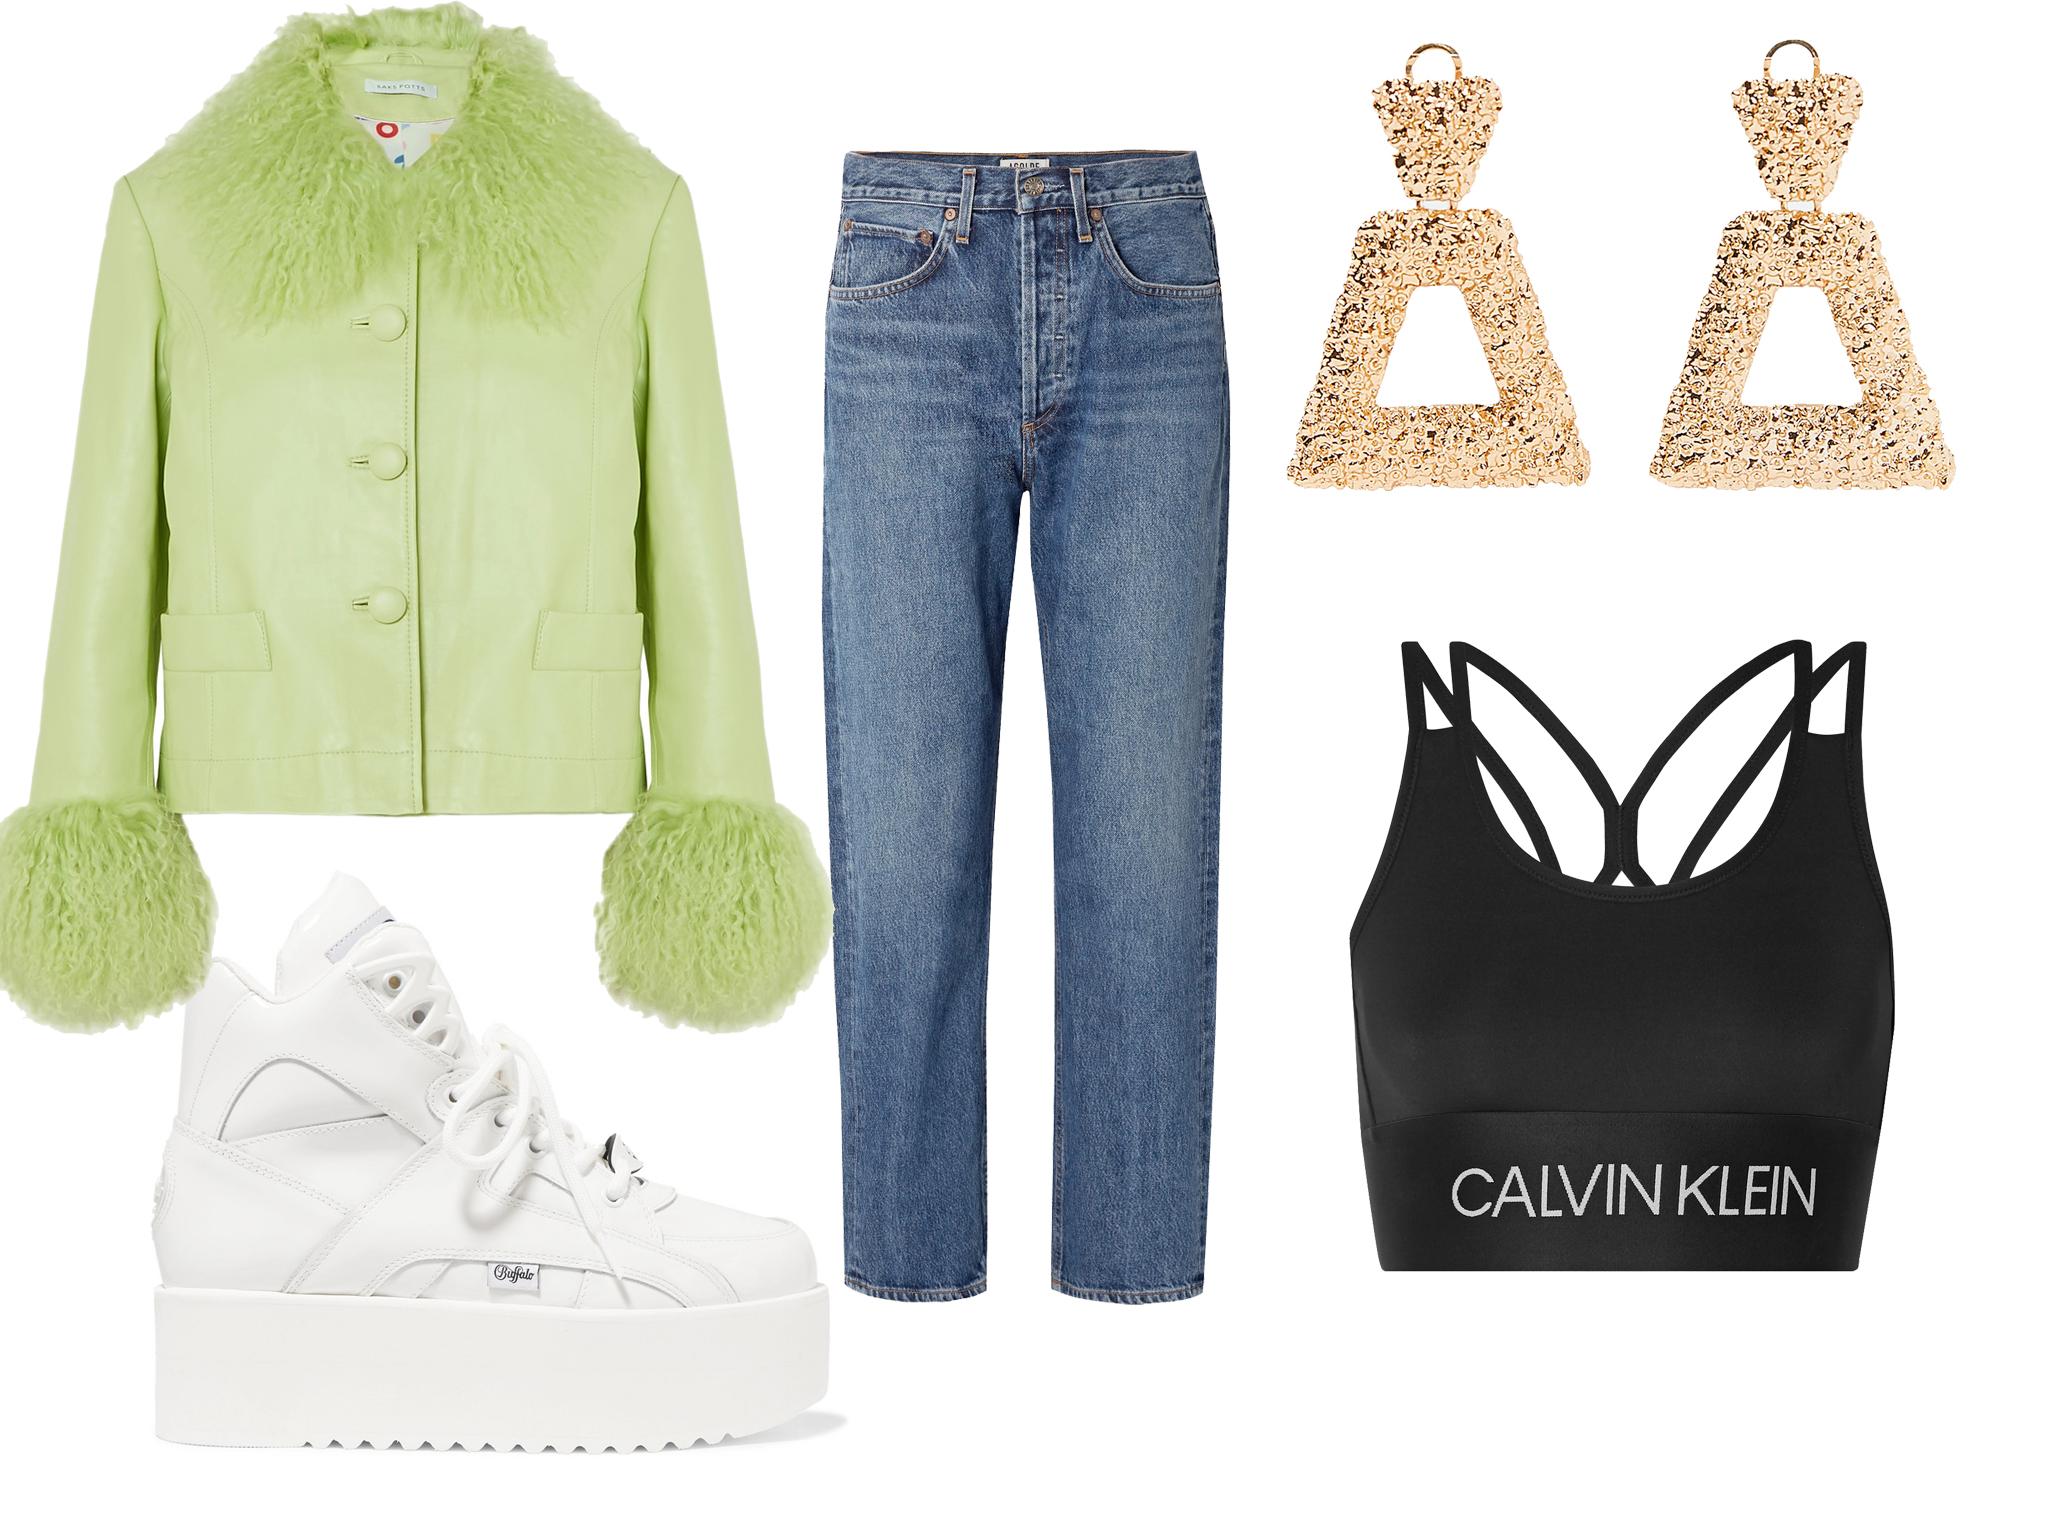 Saks Potts, Shearling-trimmed leather jacket: £511; Junya Watanabe x Buffalo, Patent-leather platform sneakers: £178; Agolde, ’90s mid-rise straight jeans: £240; Zara, Textured geometric earrings: £12.99; Calvin Klein, Printed stretch sports bra: £45